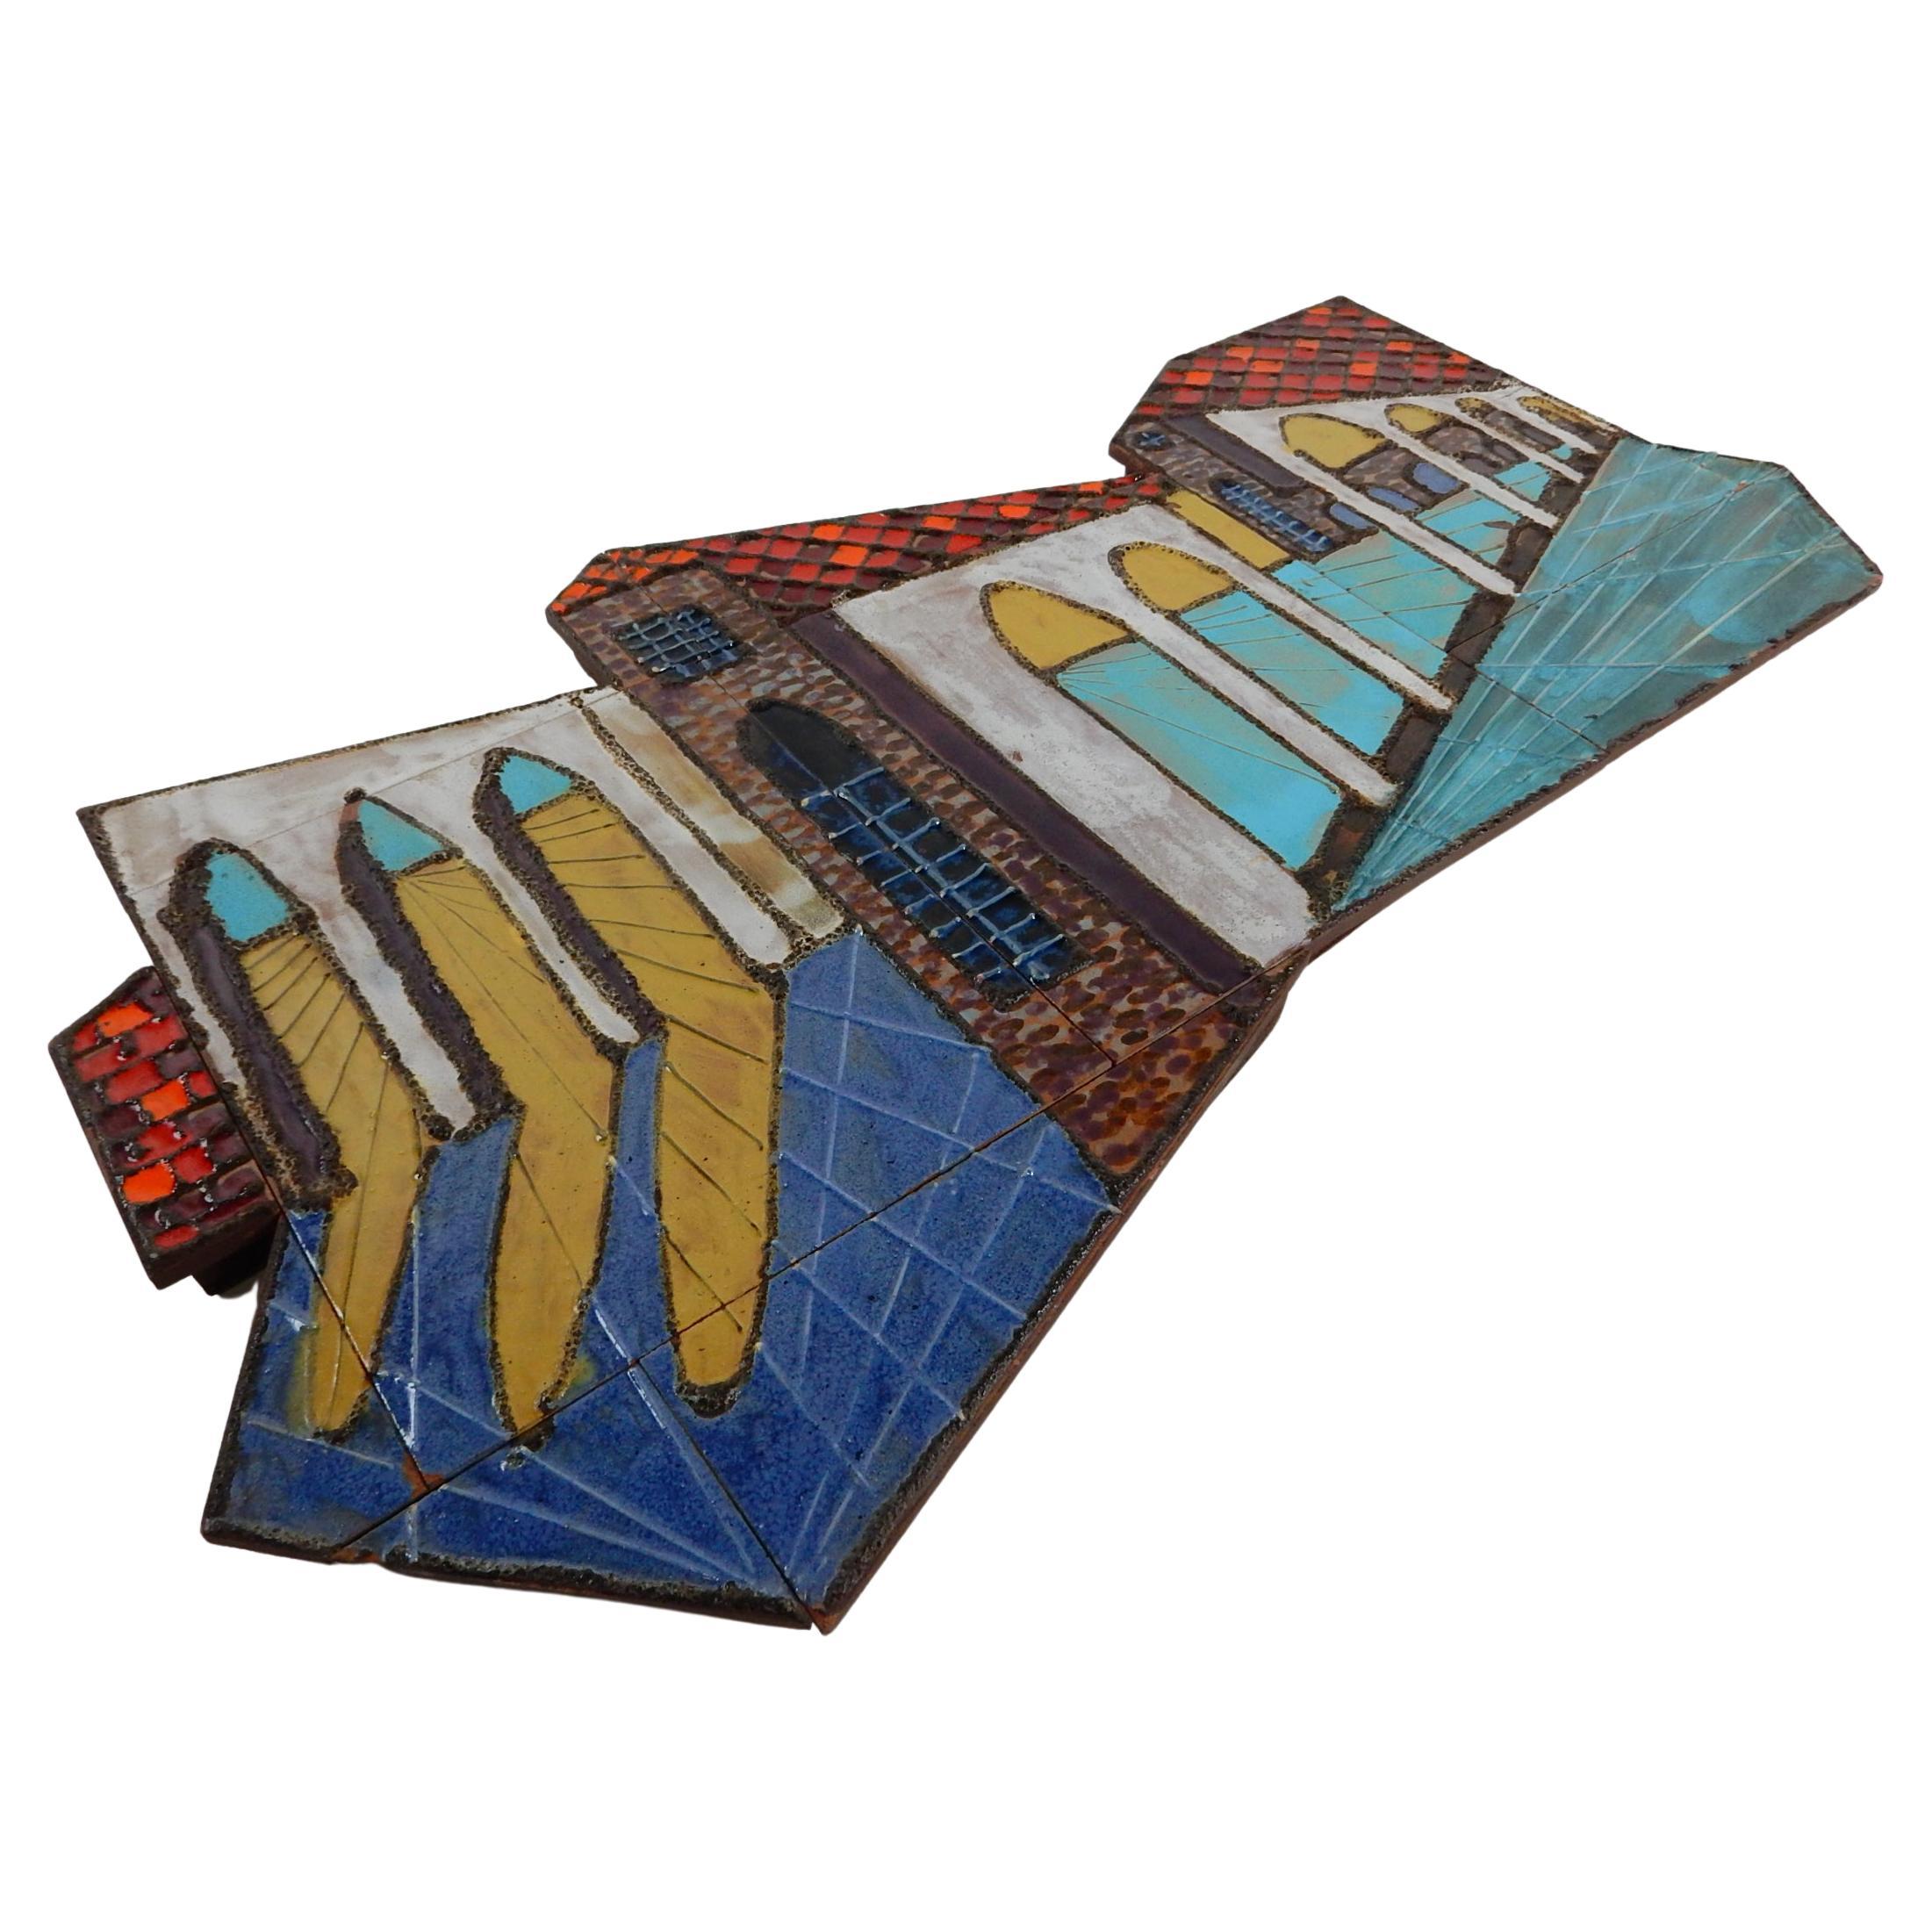 Large asymmetrical architectural ceramic tile wall art sculpture. 
Beautiful color glazes of turquoise, red and blue.
Hangs on 2 D rings on back. Not signed. 
Sofa size measuring 3 feet wide(36in) X 22in.